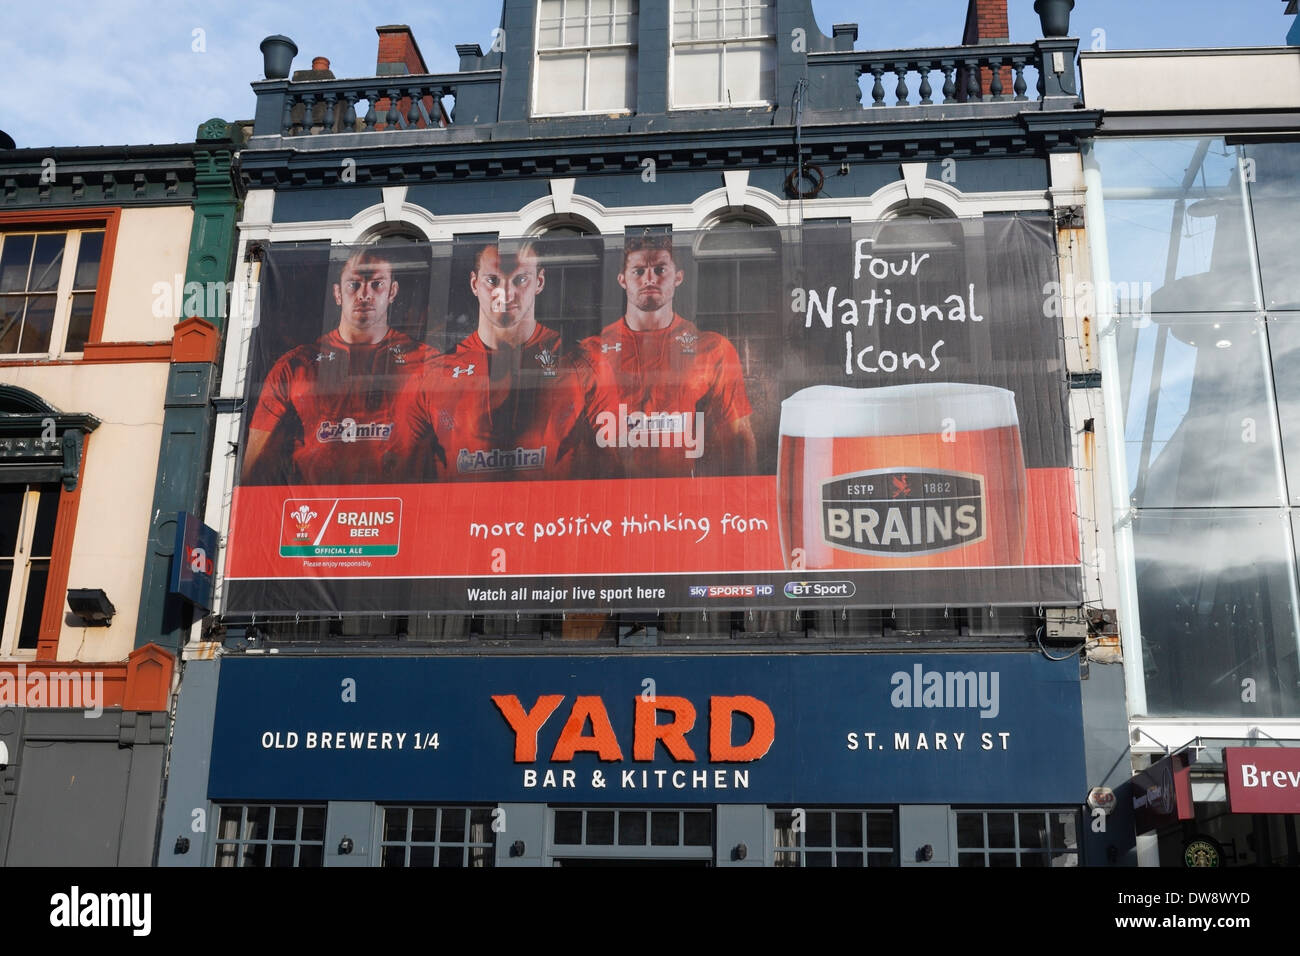 The Yard public house, Cardiff city centre, Wales UK, Welsh Rugby home nations Brains beer sponsors advert, old brewery quarter Stock Photo